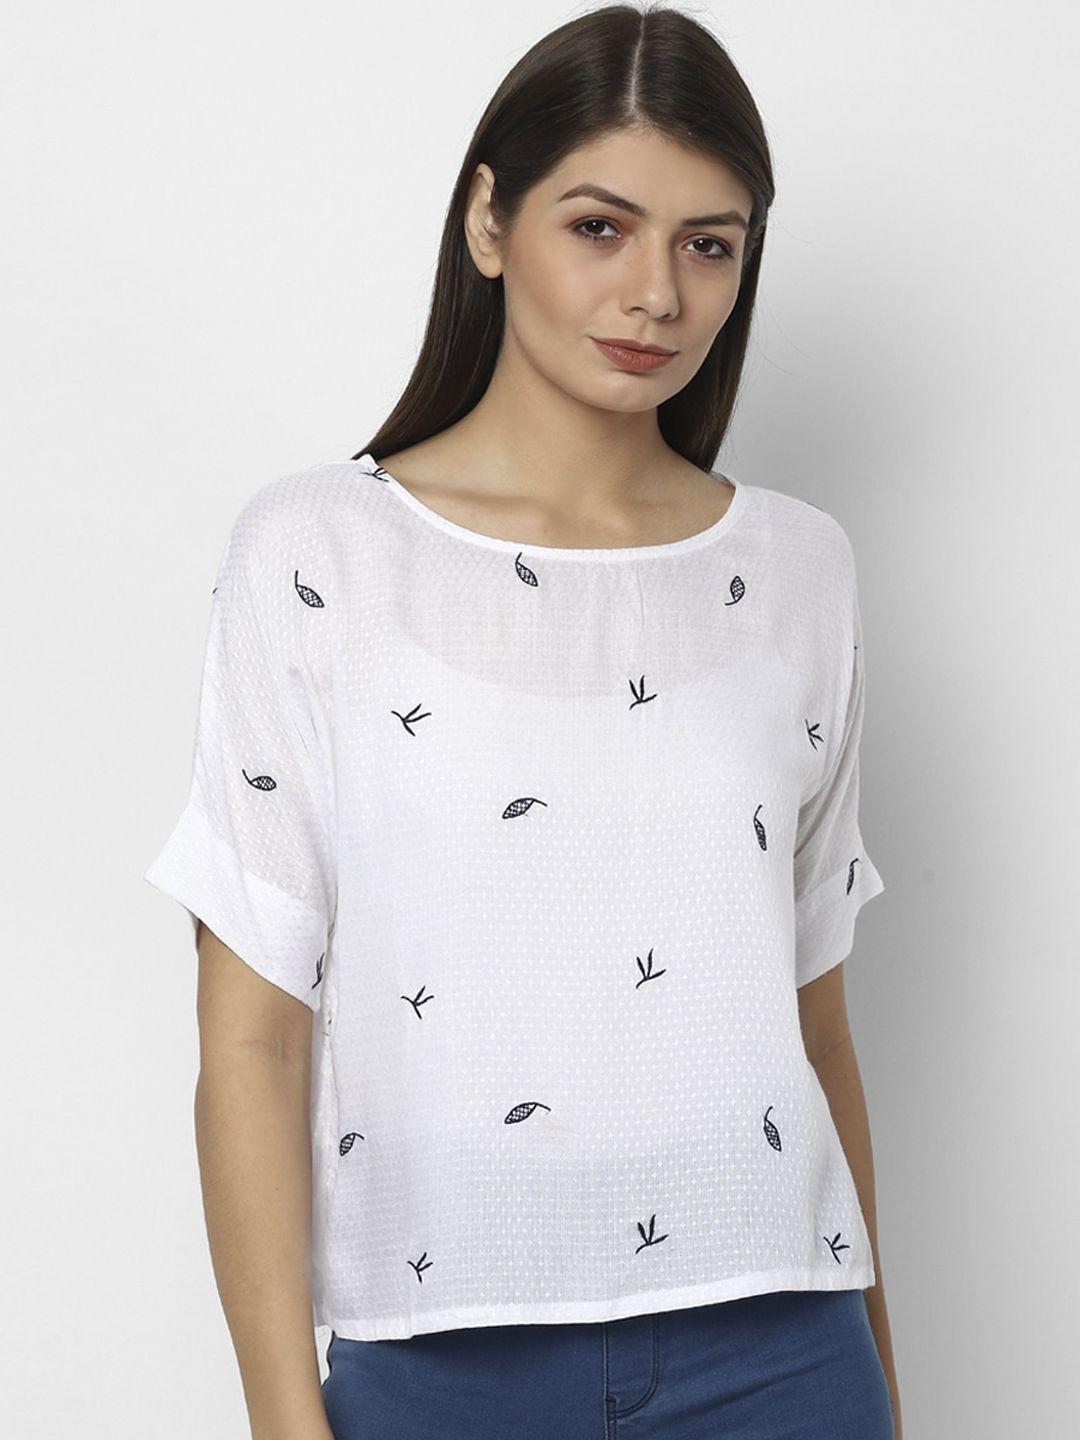 allen solly woman white printed pure cotton regular top